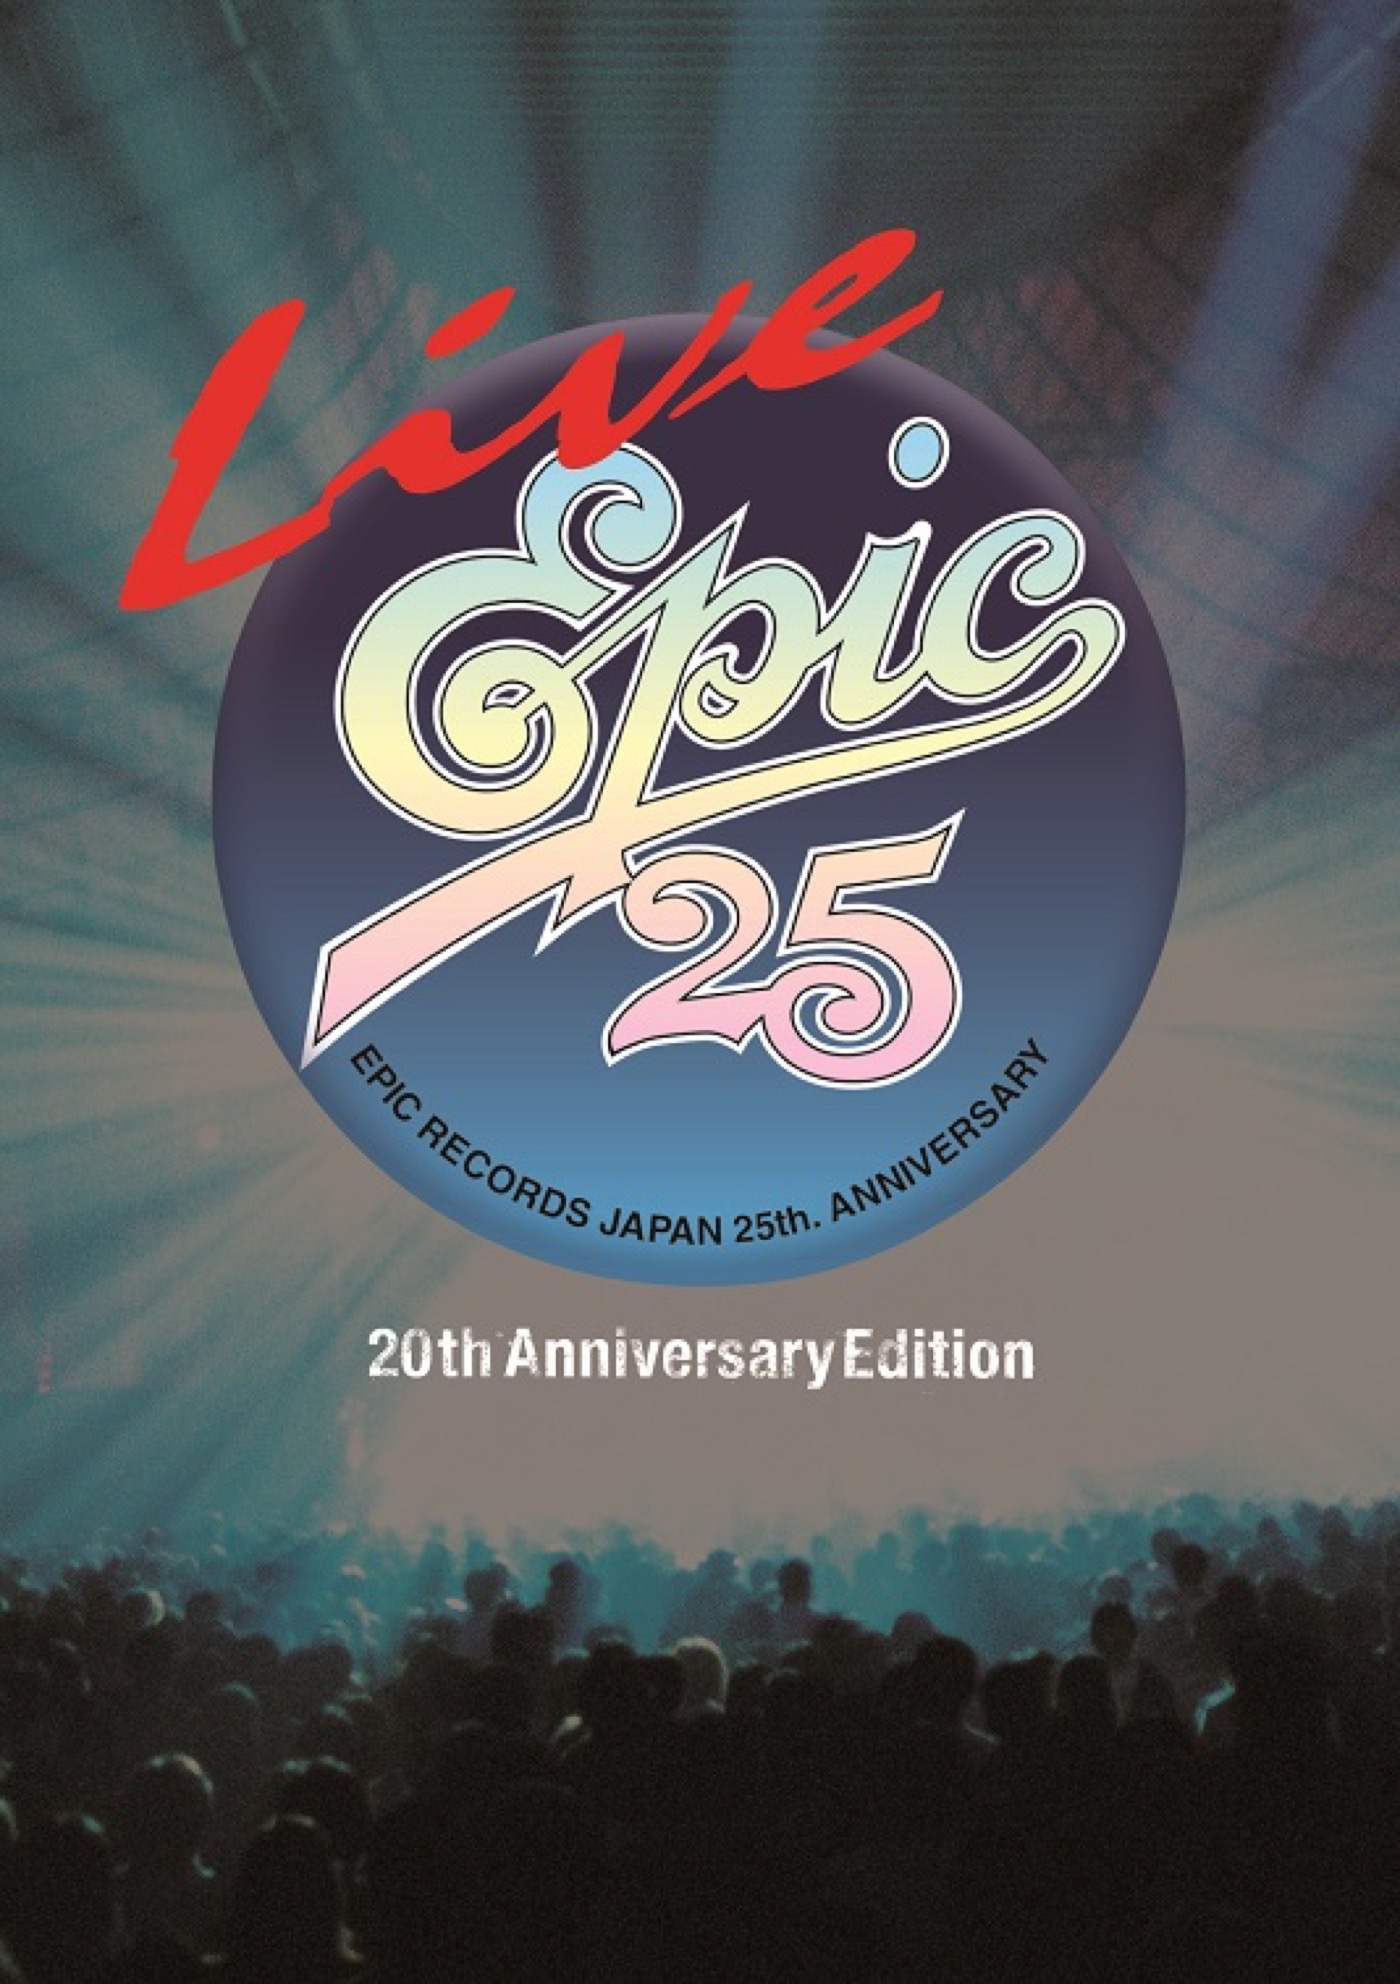 TM NETWORK、BARBEE BOYS、佐野元春らが豪華競演！『Live EPIC 25』Blu-rayがリリース